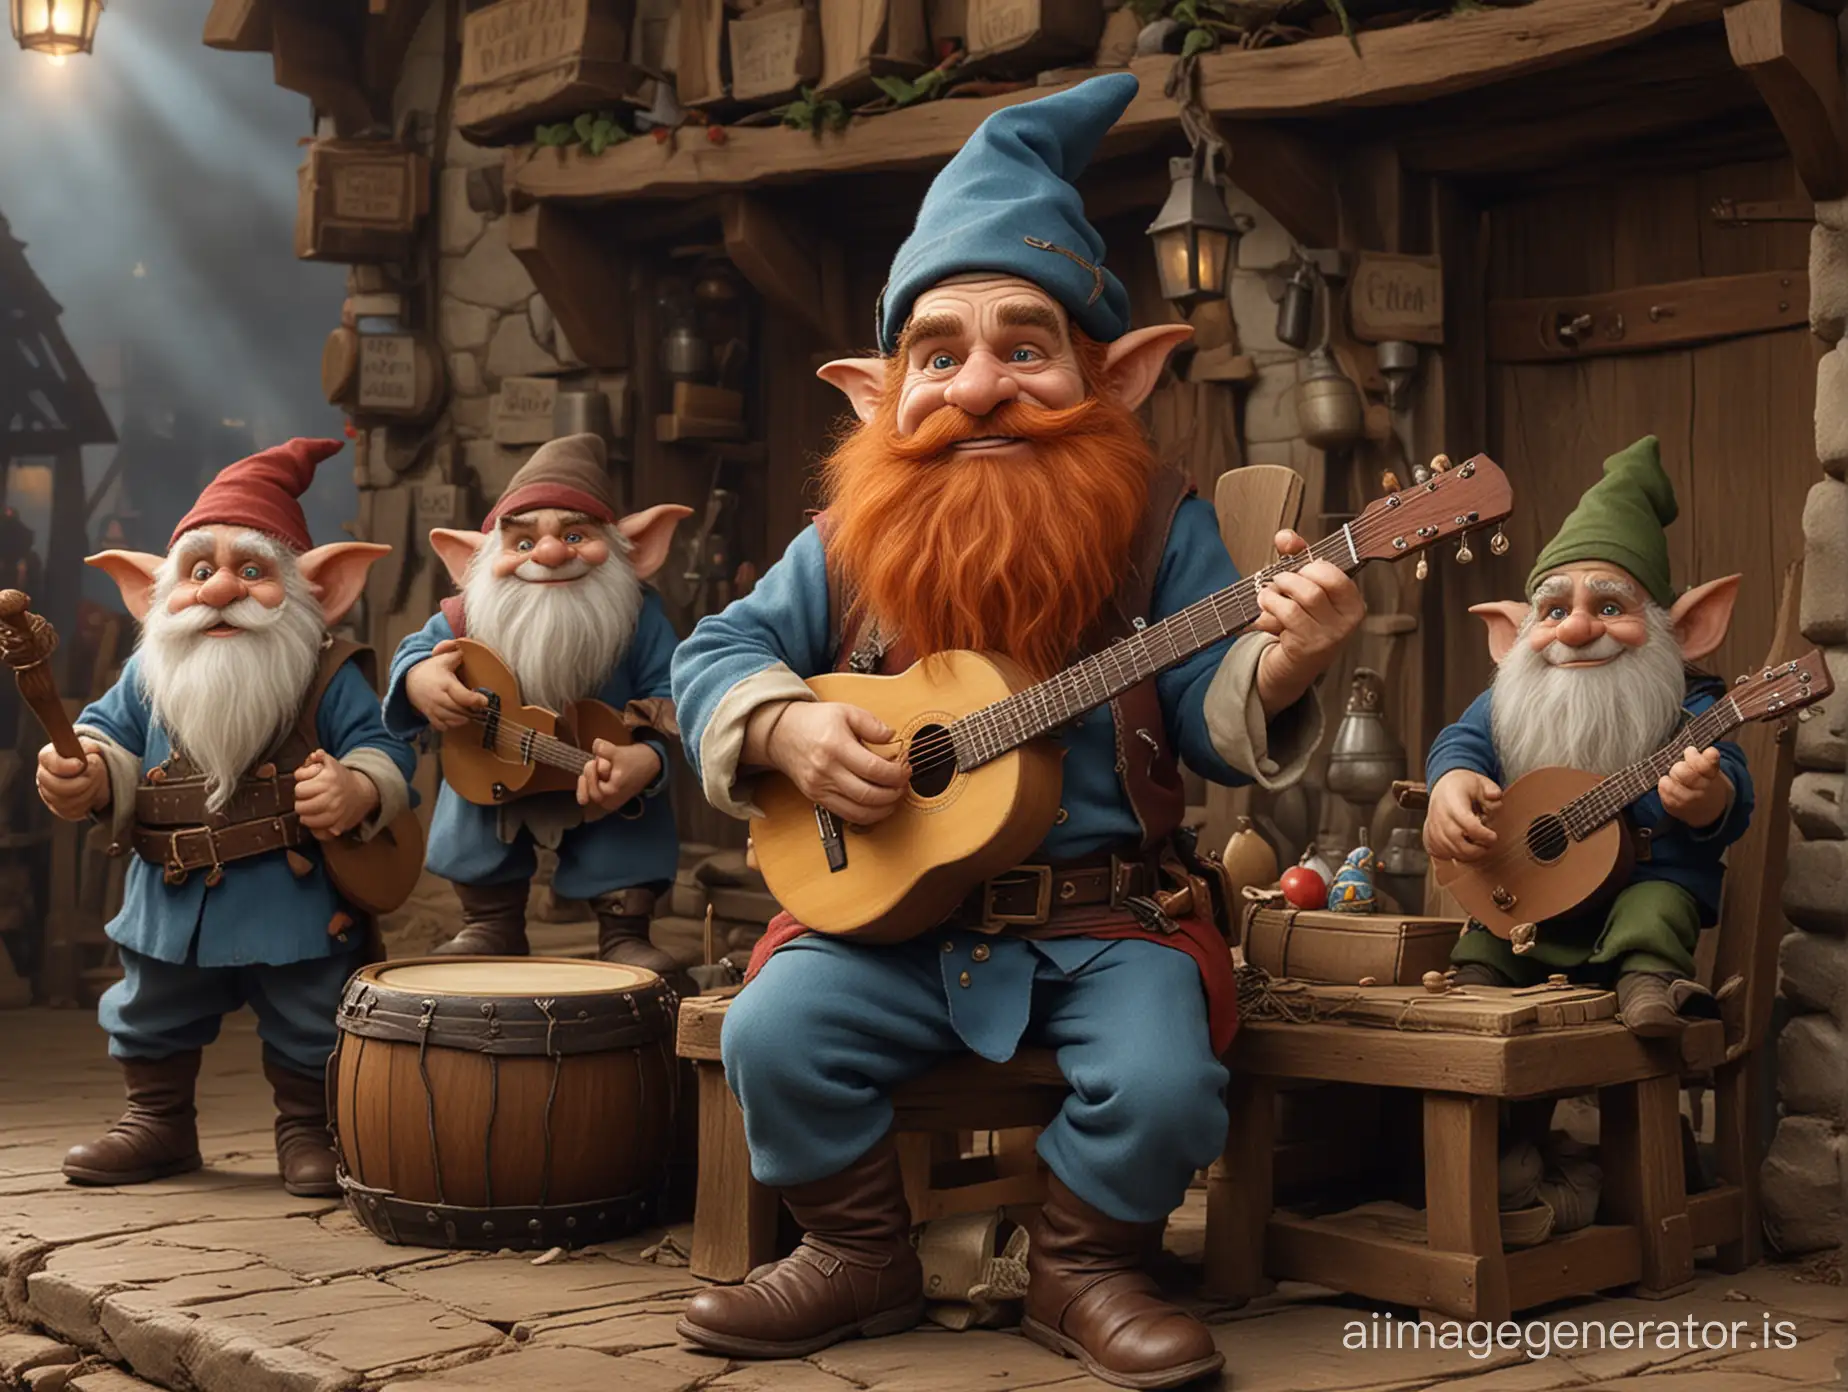 Fantasy-Bards-Perform-in-Tavern-Dwarf-Gnome-and-Goblin-Musicians